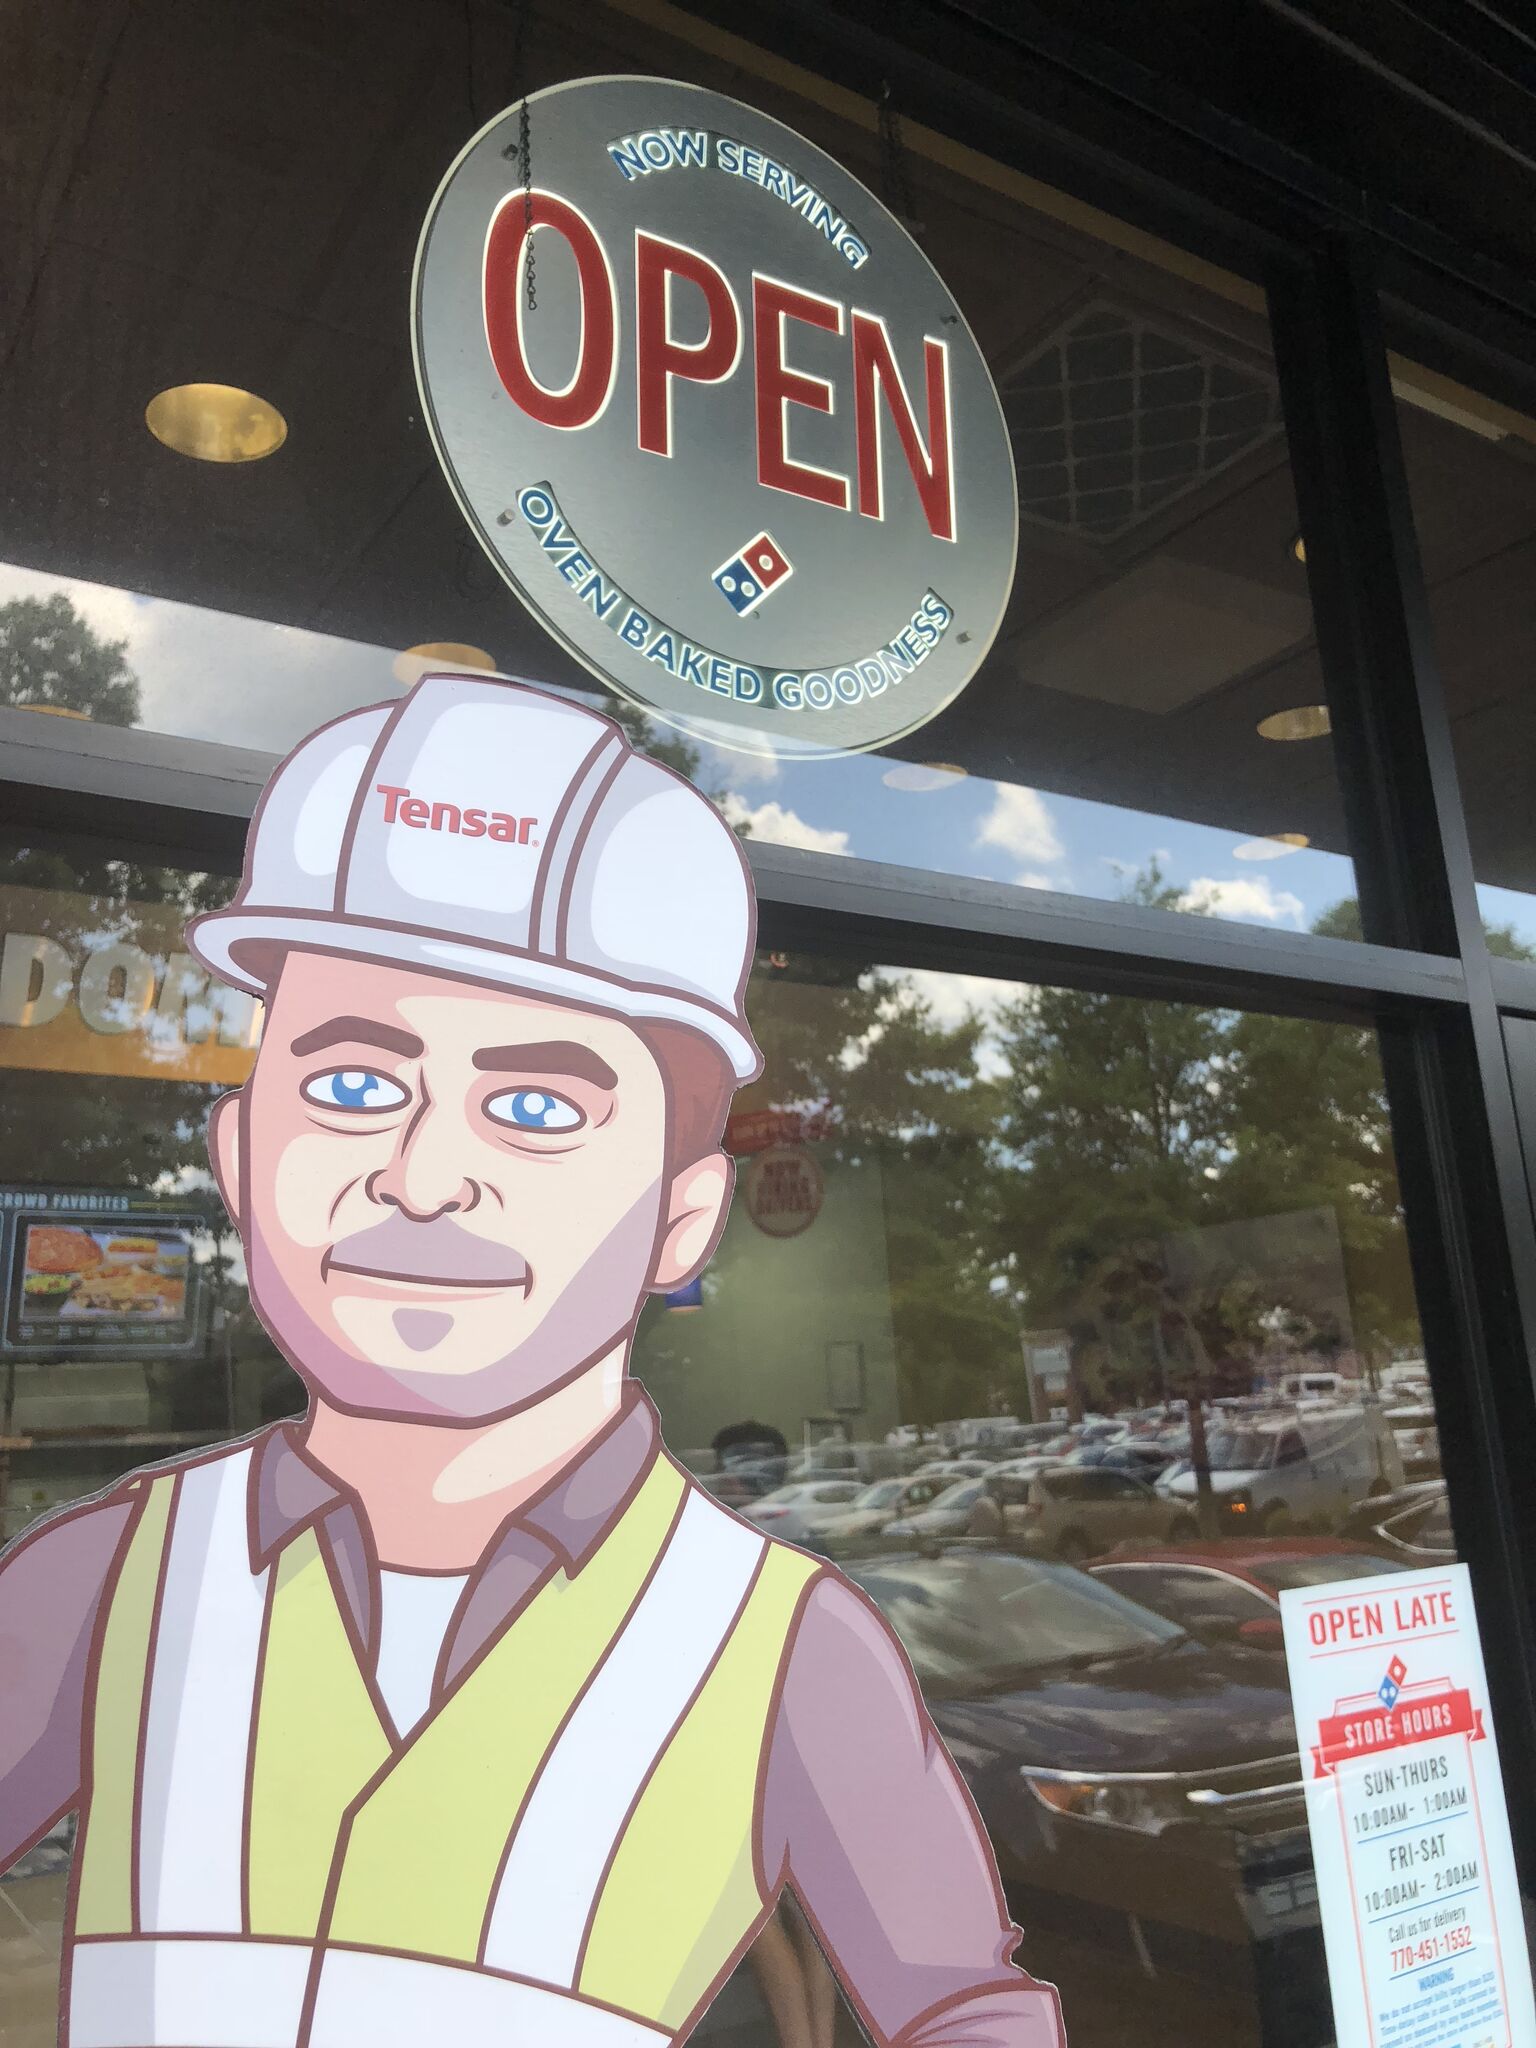 Tensar-Dominos-Paving-for-Pizza-Where-Beau-Goes-Tour